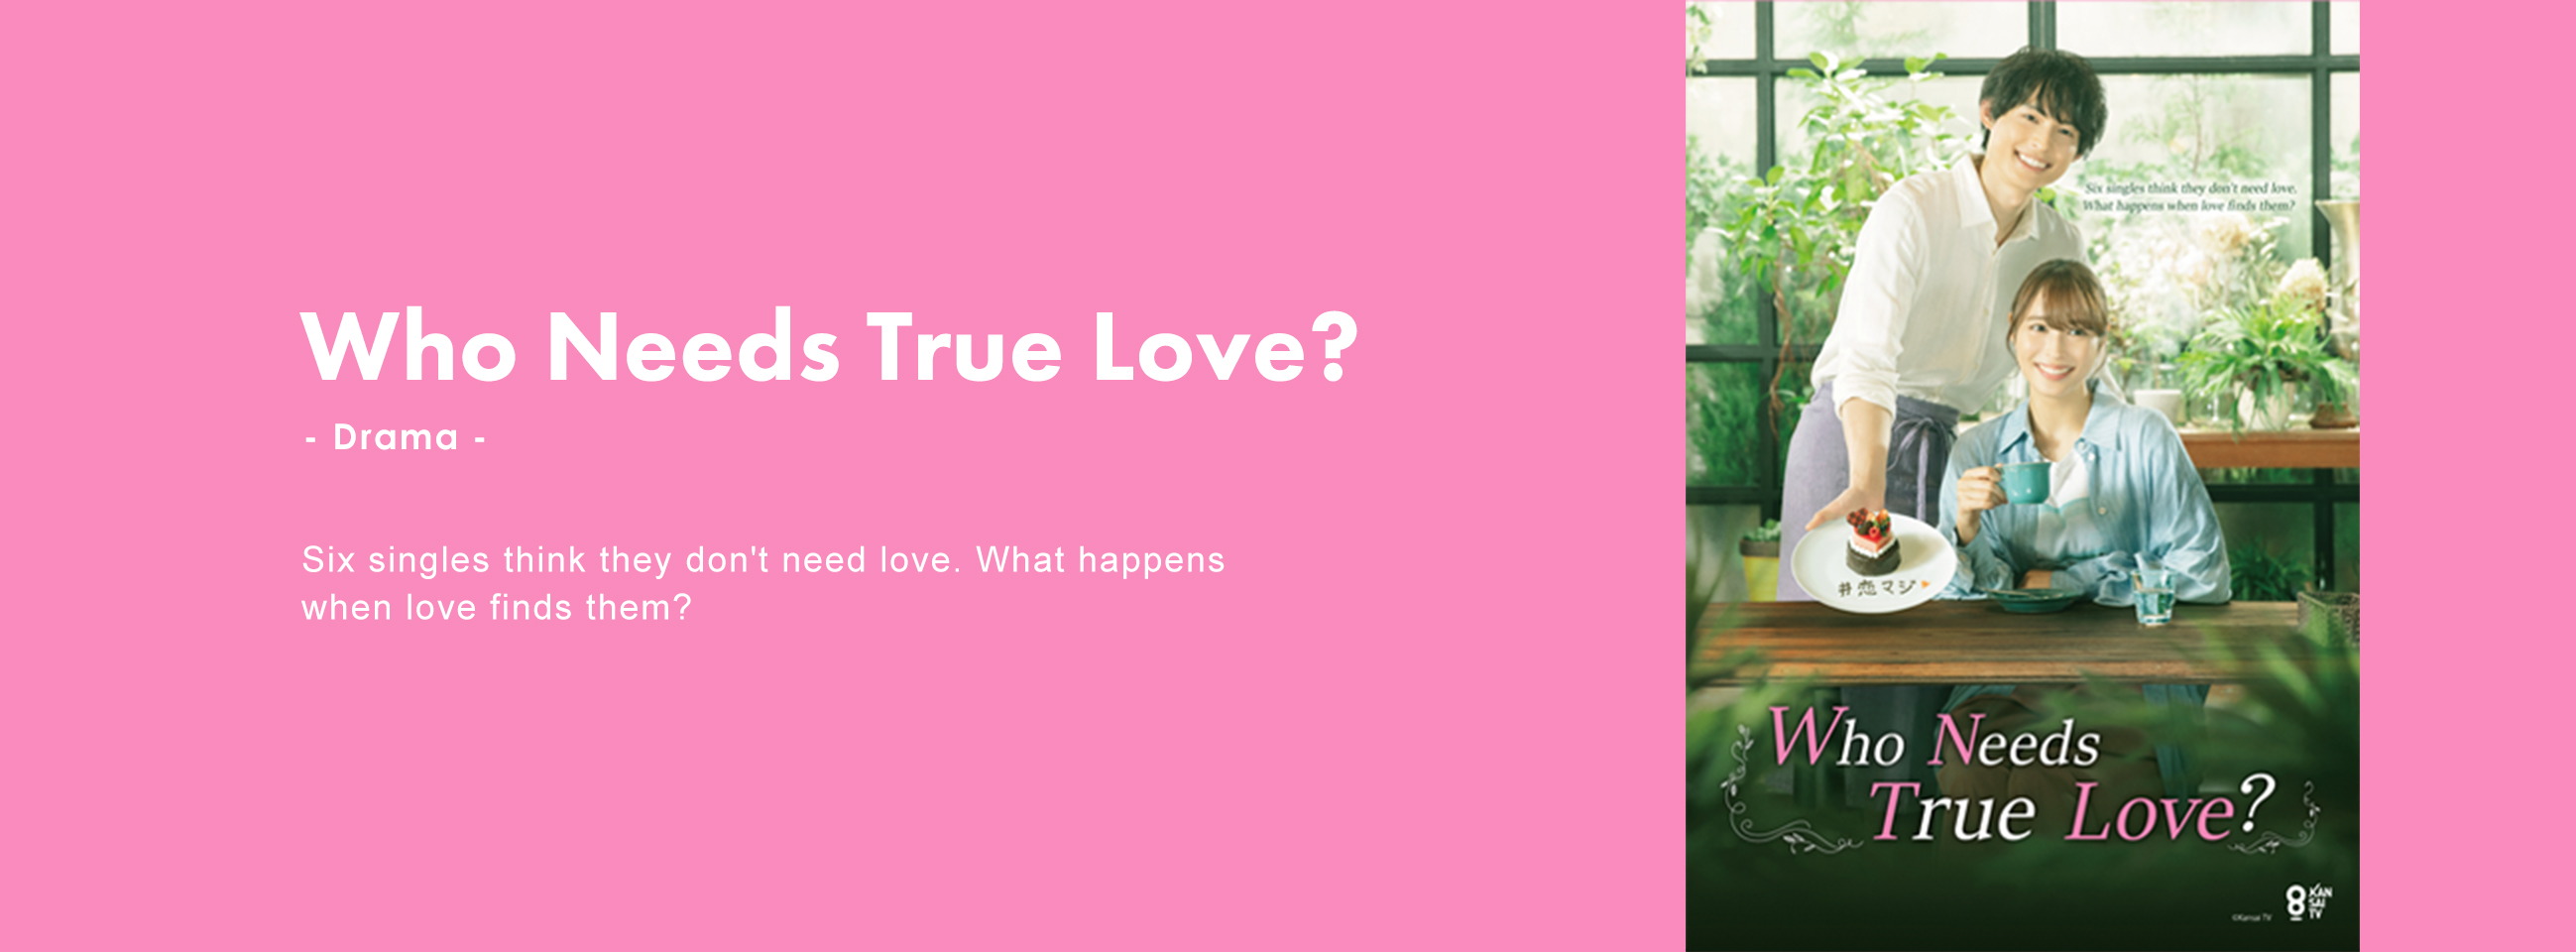 Six singles think they don't need love. What happens when love finds them?